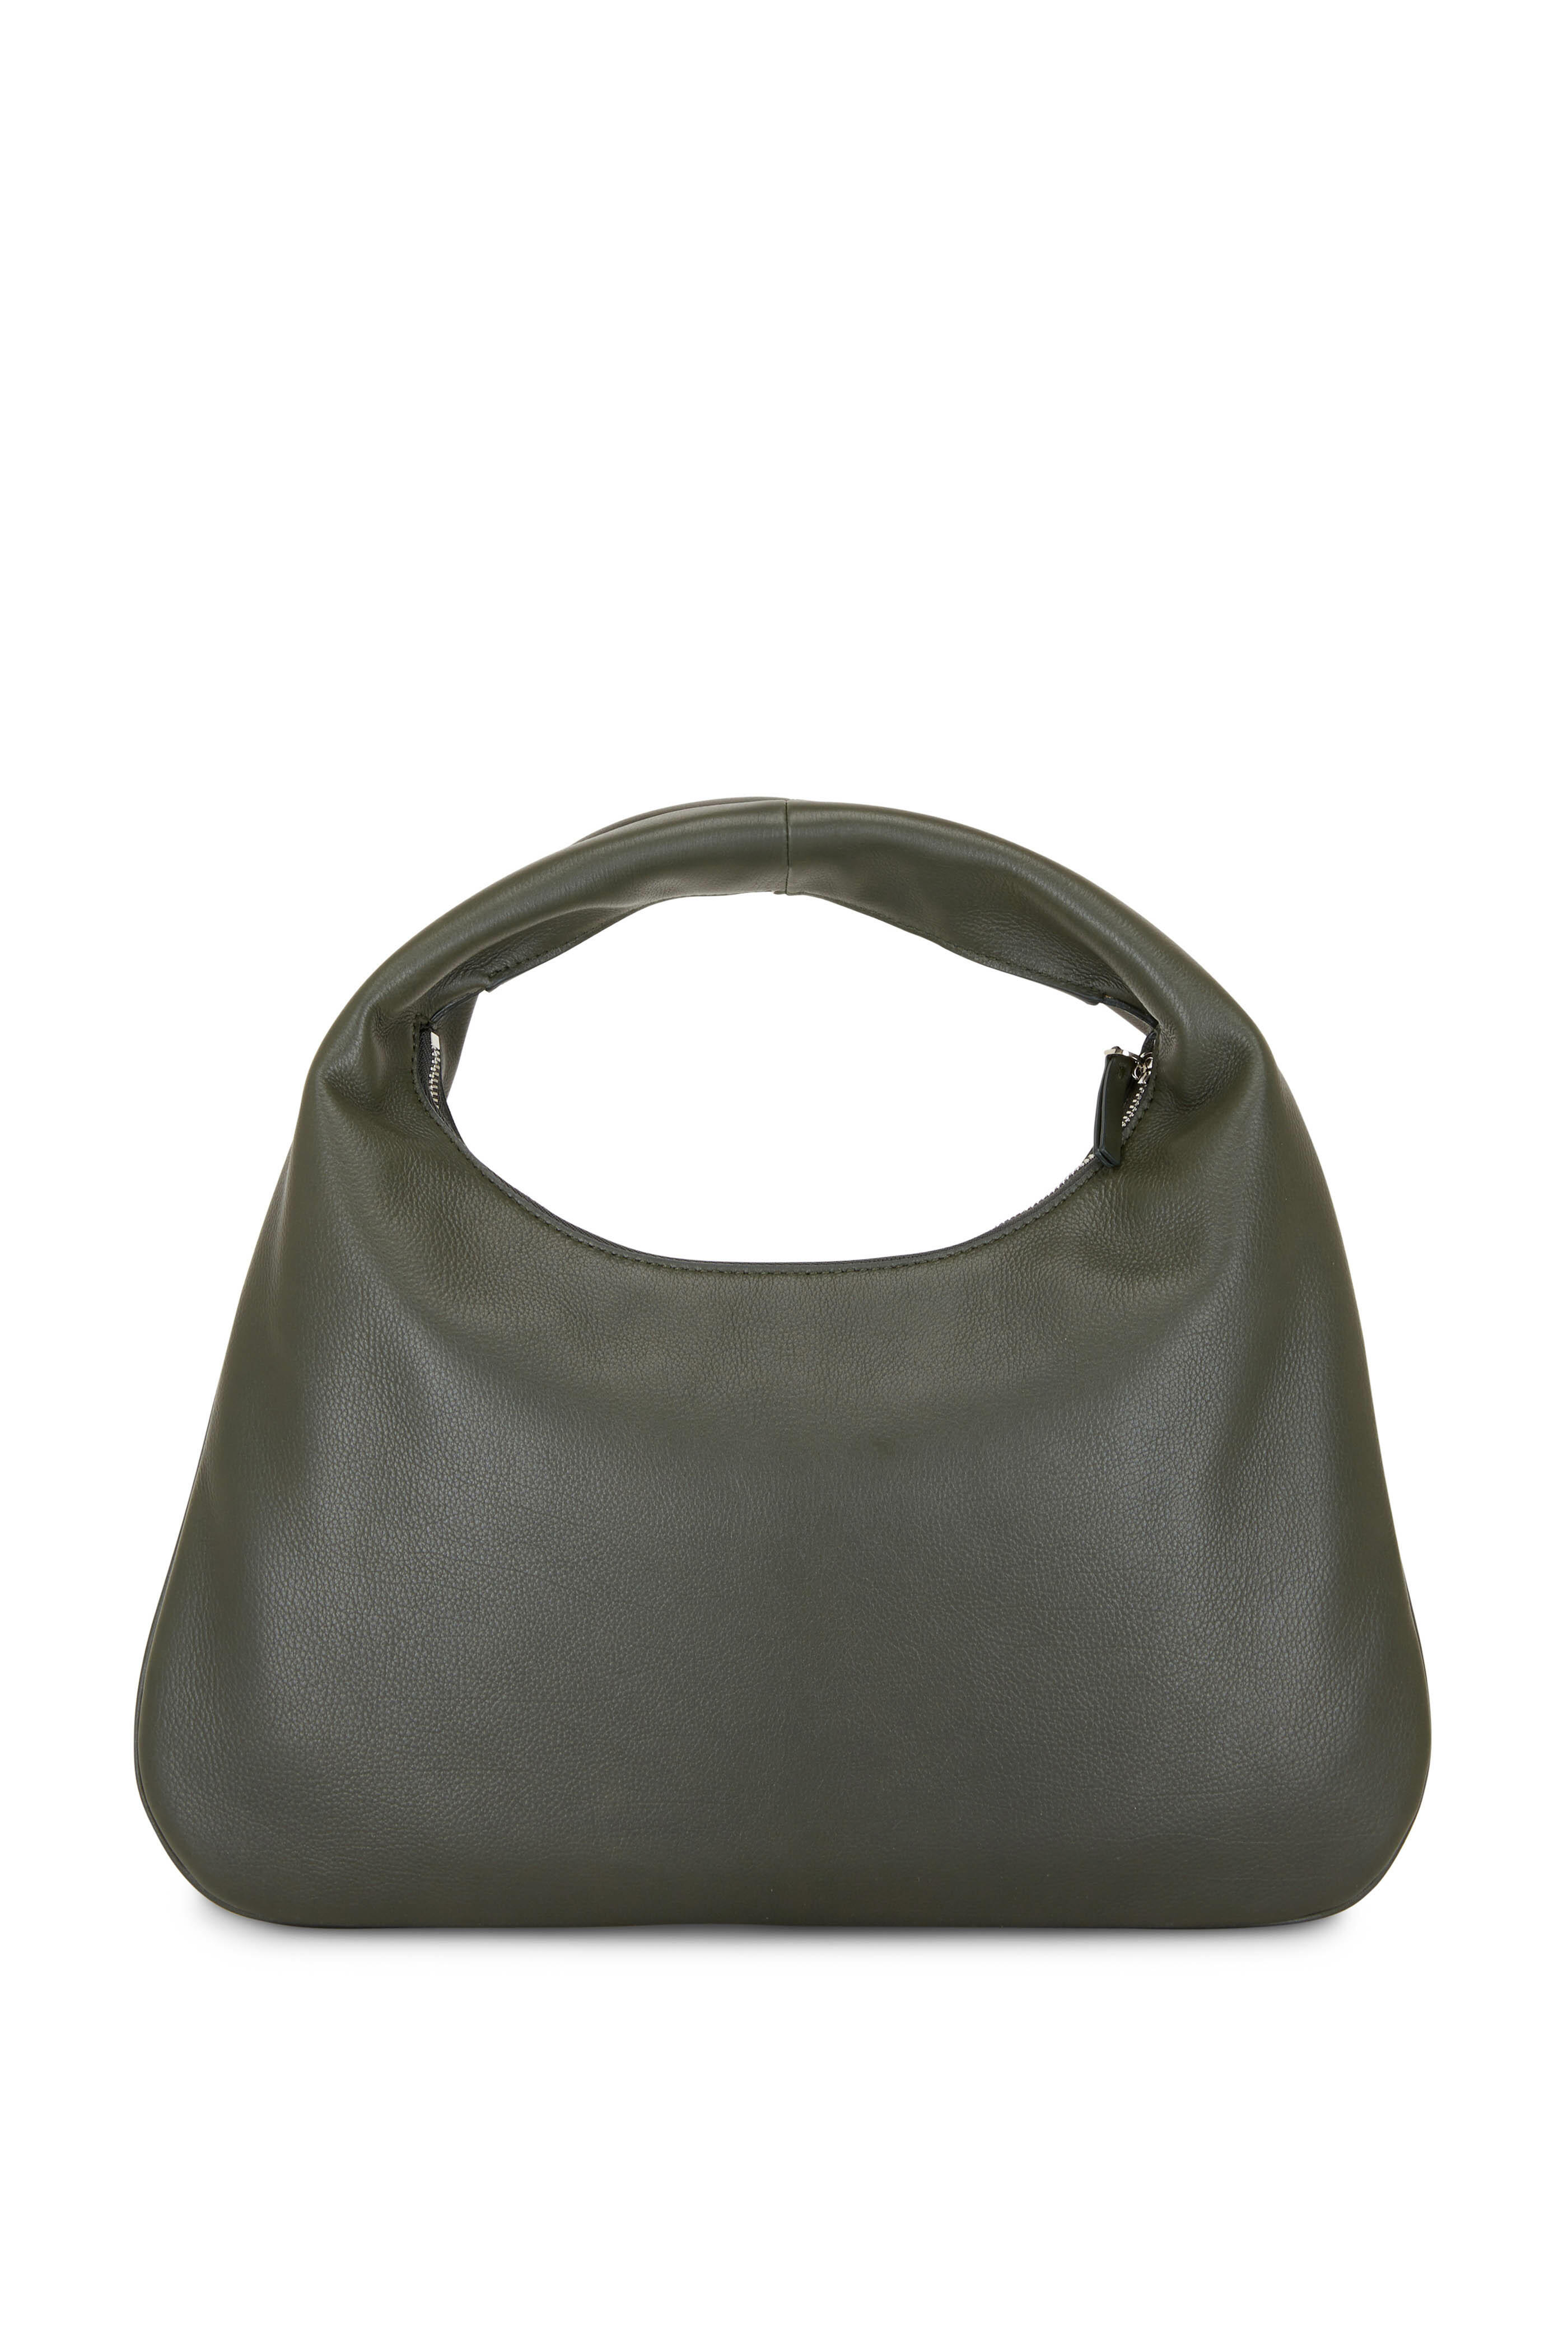 The Row - Everyday Olive Leather Small Shoulder Bag